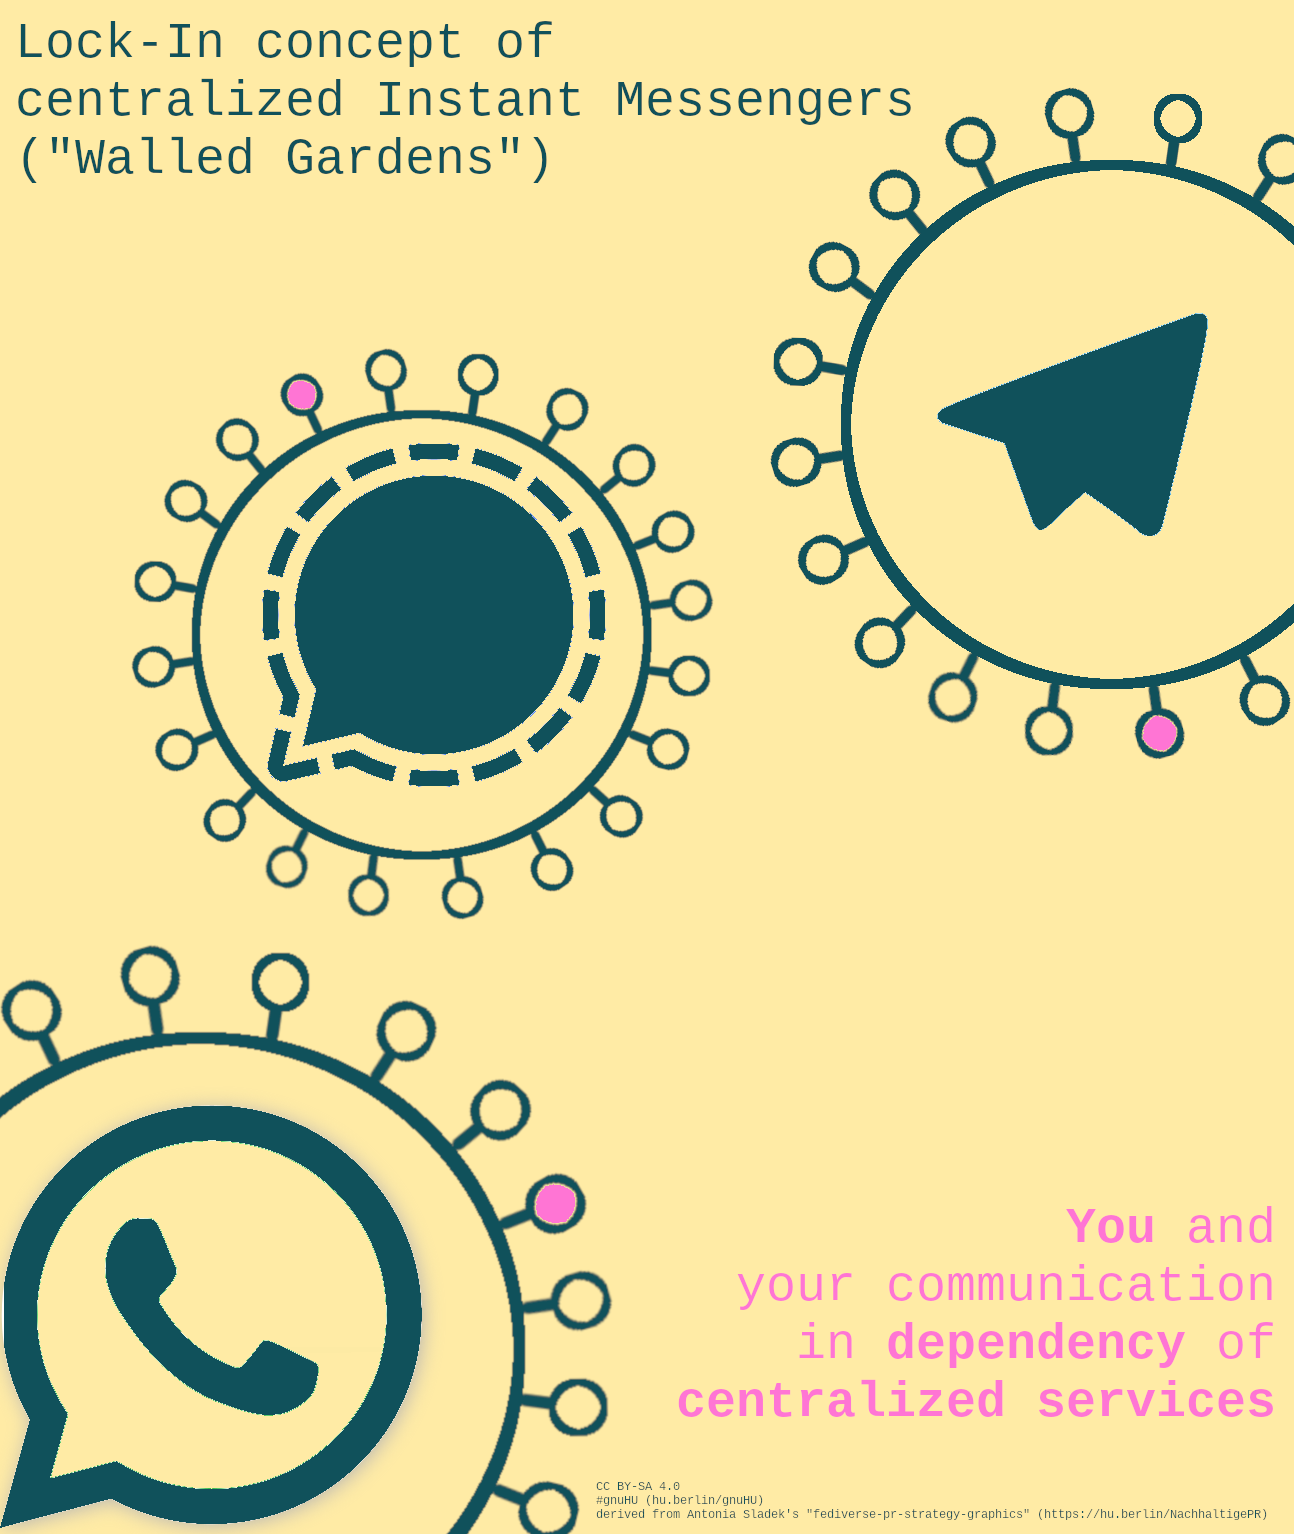 federated_messenger3-1_cc_by-sa40_walled-gardens.png